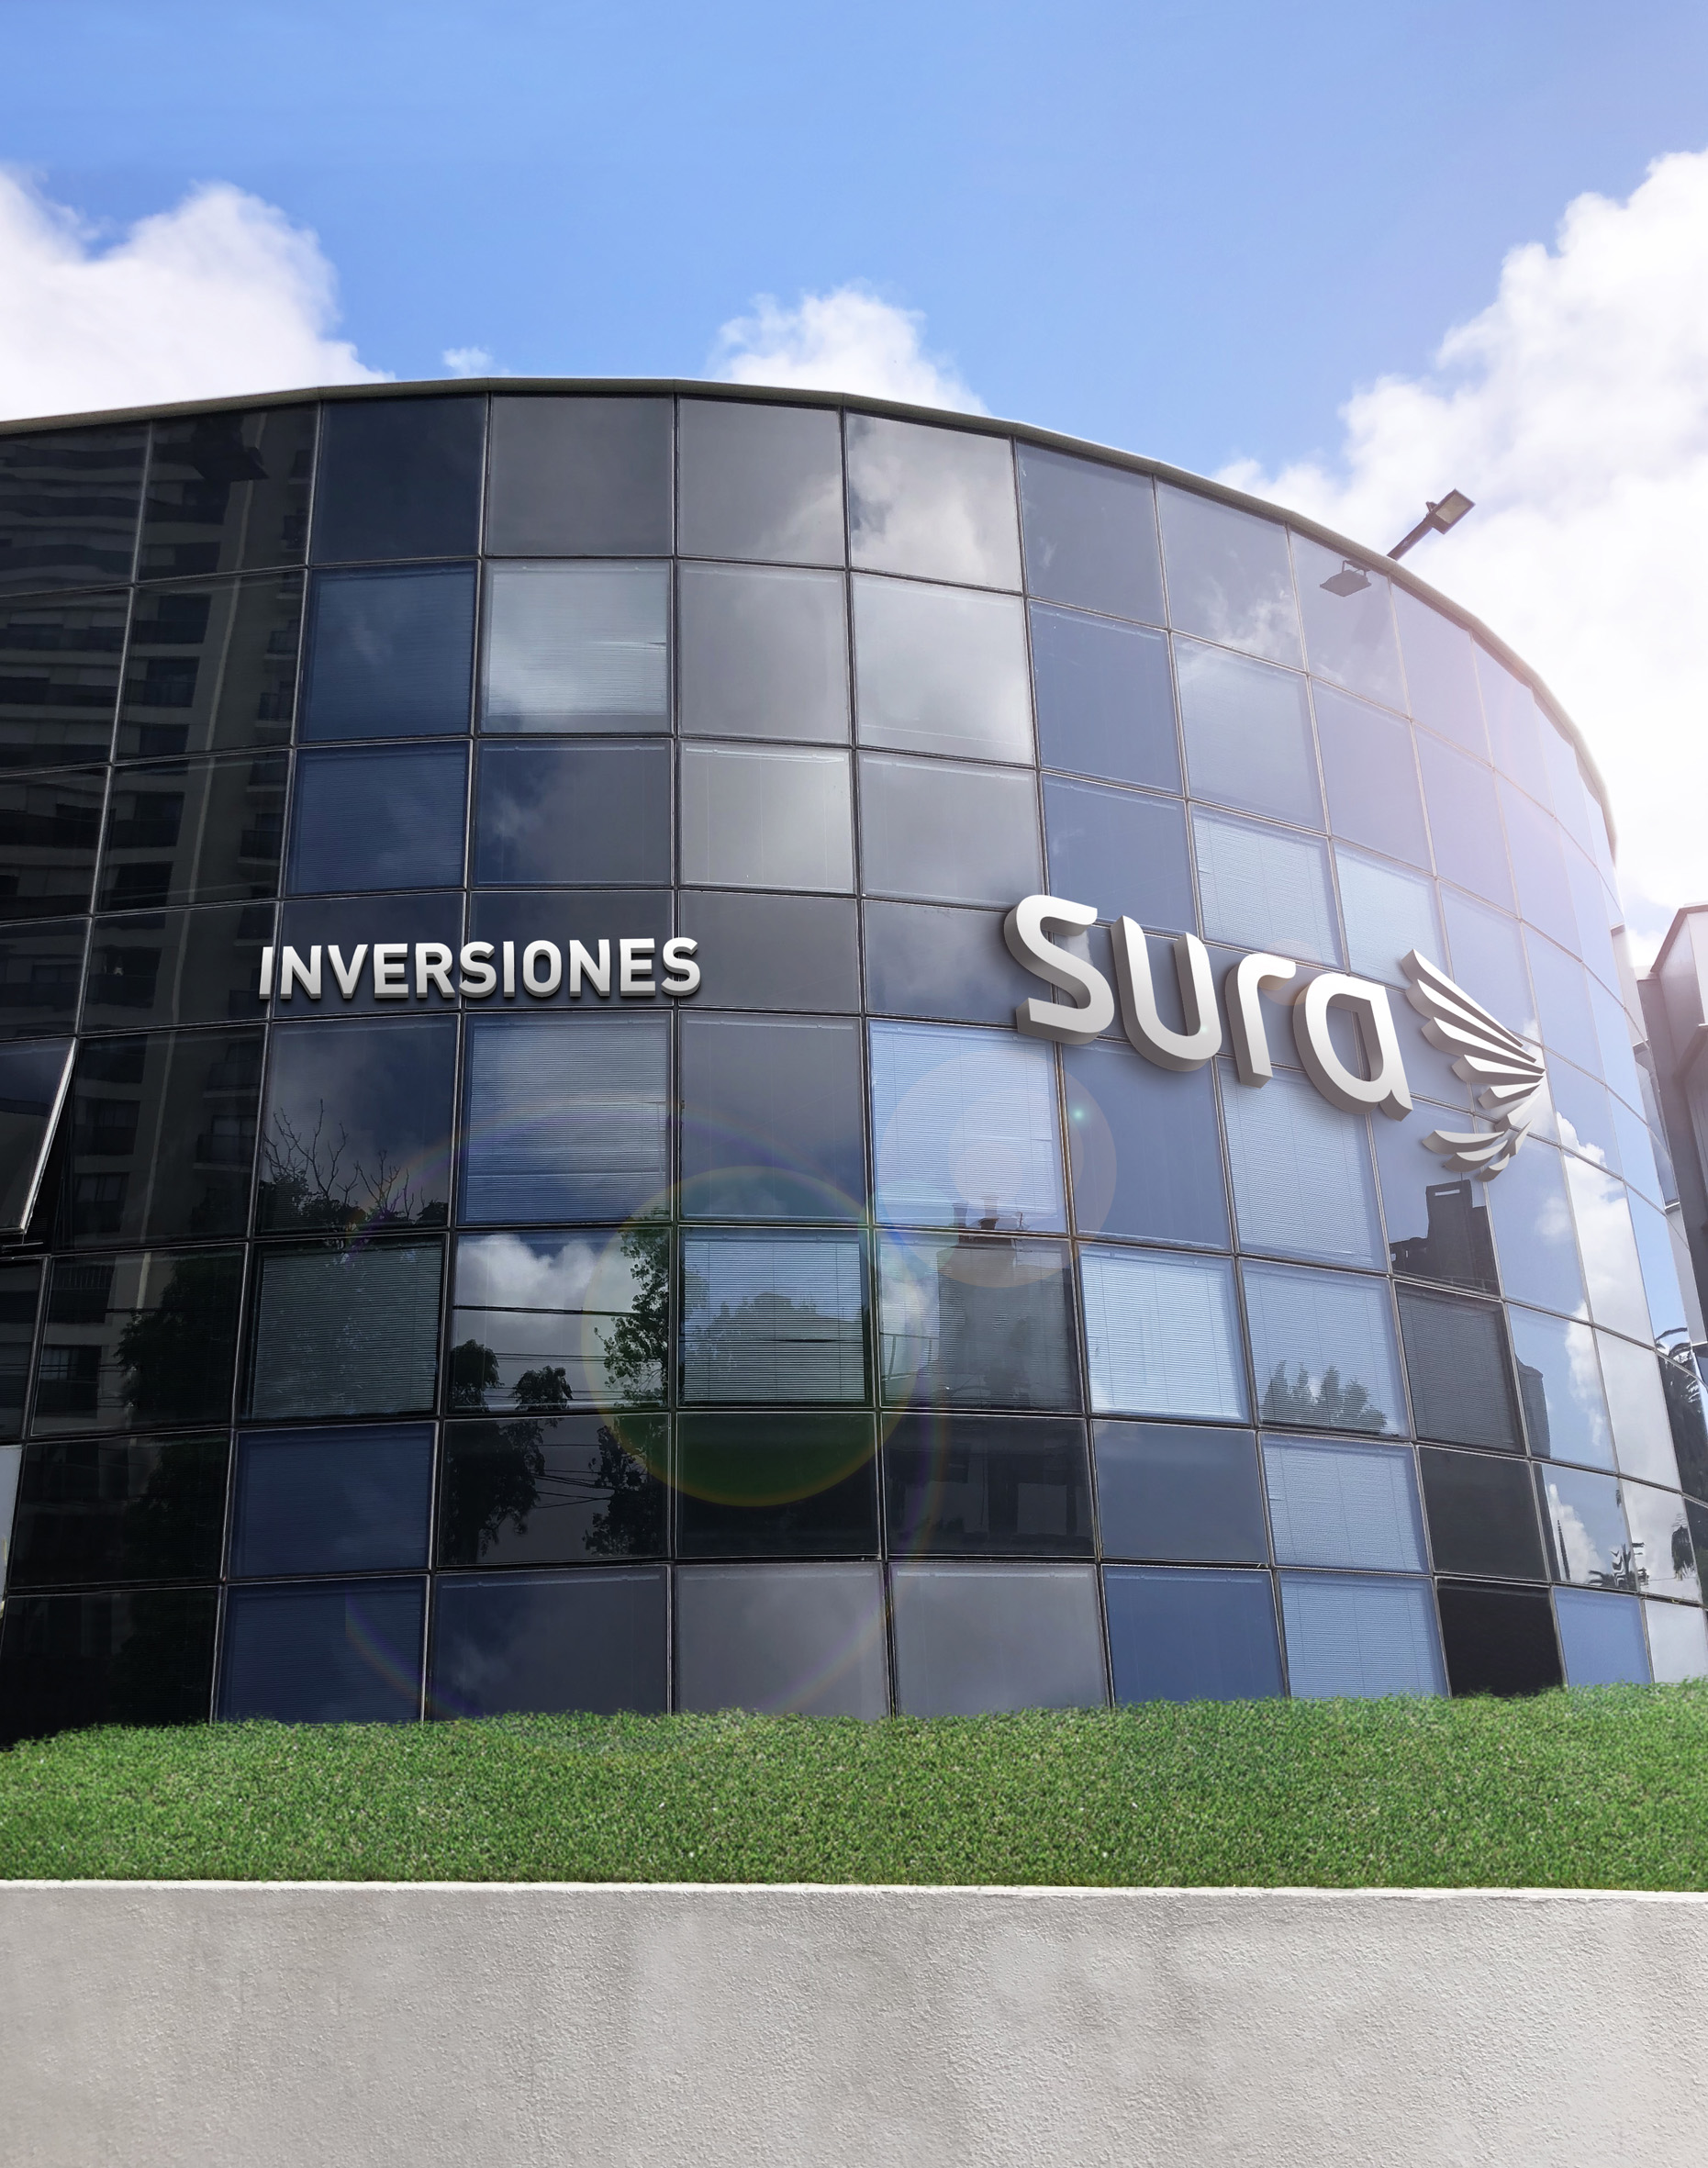 SURA Inversiones analyzed the global and local economic outlook for 2021